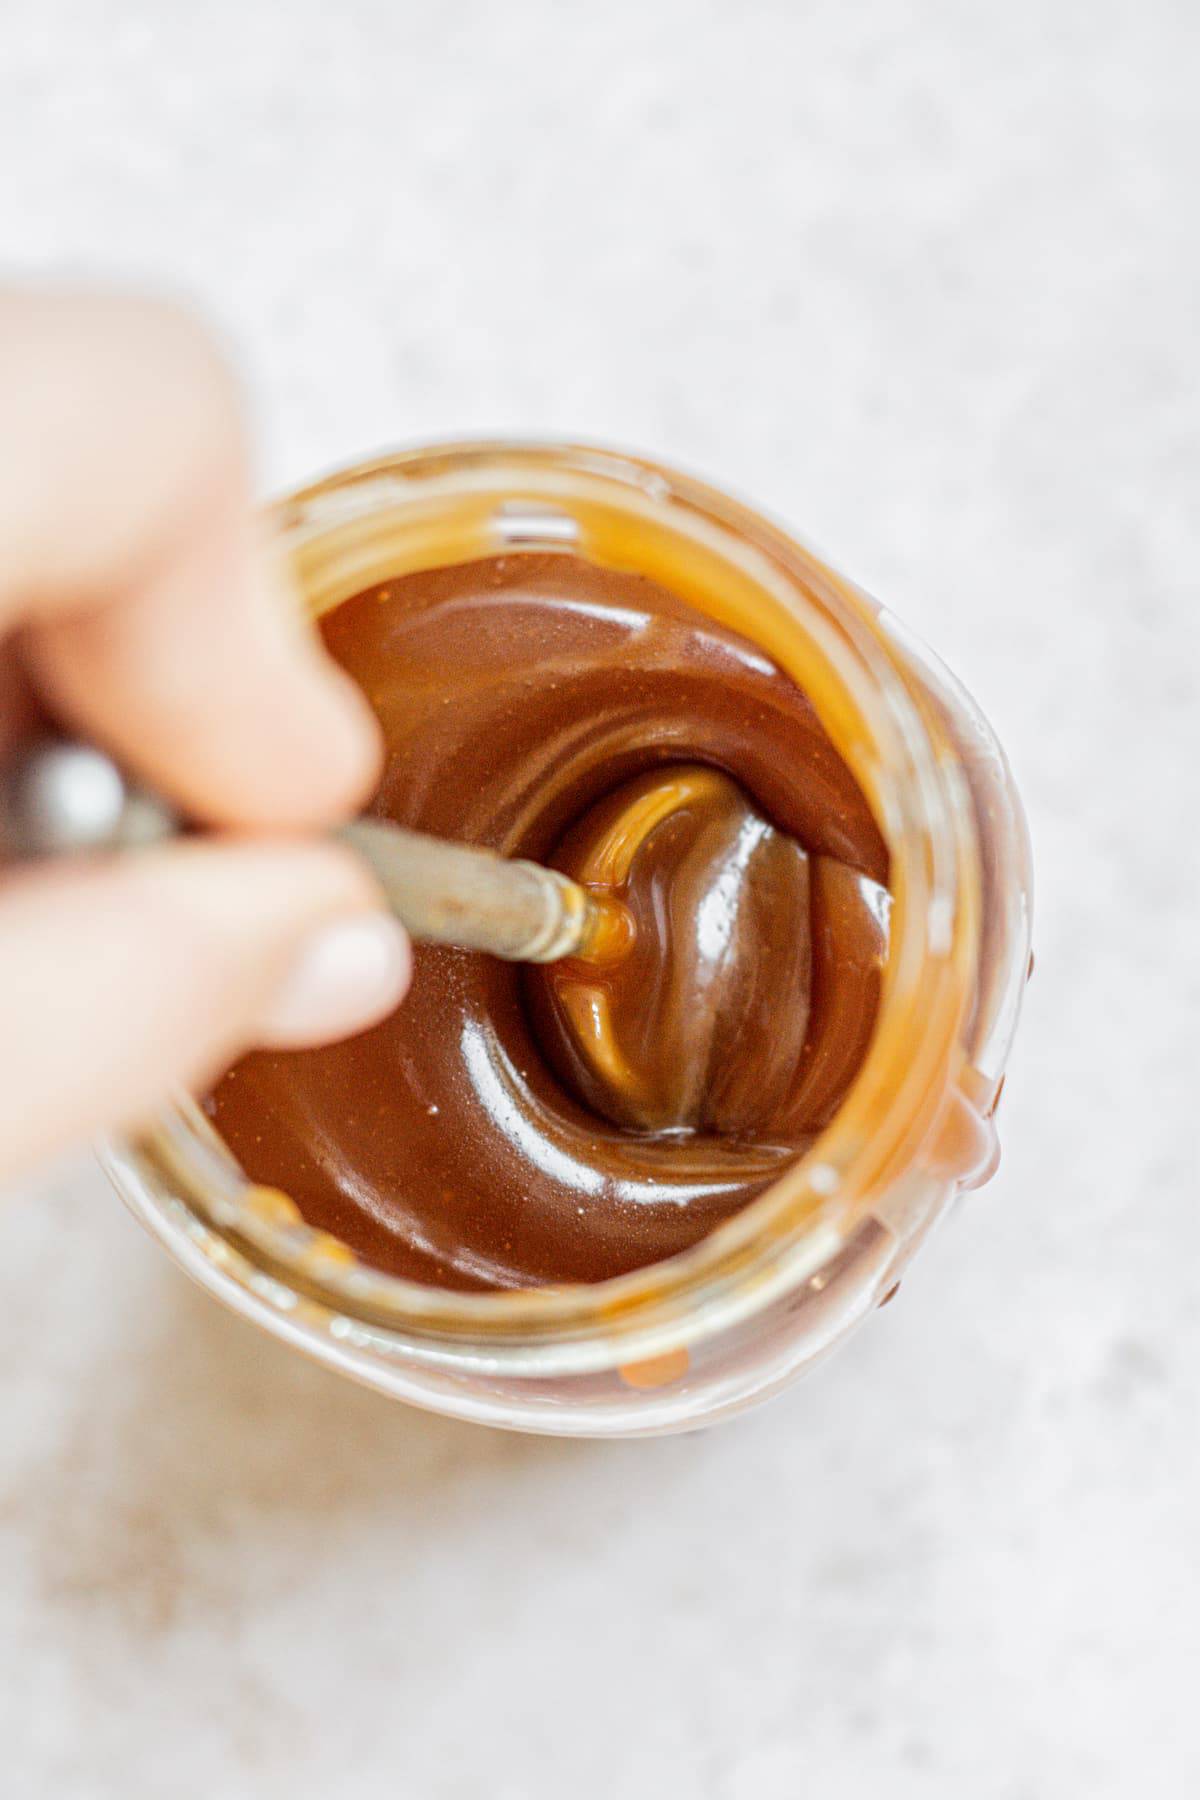 a spoon dipped into caramel.